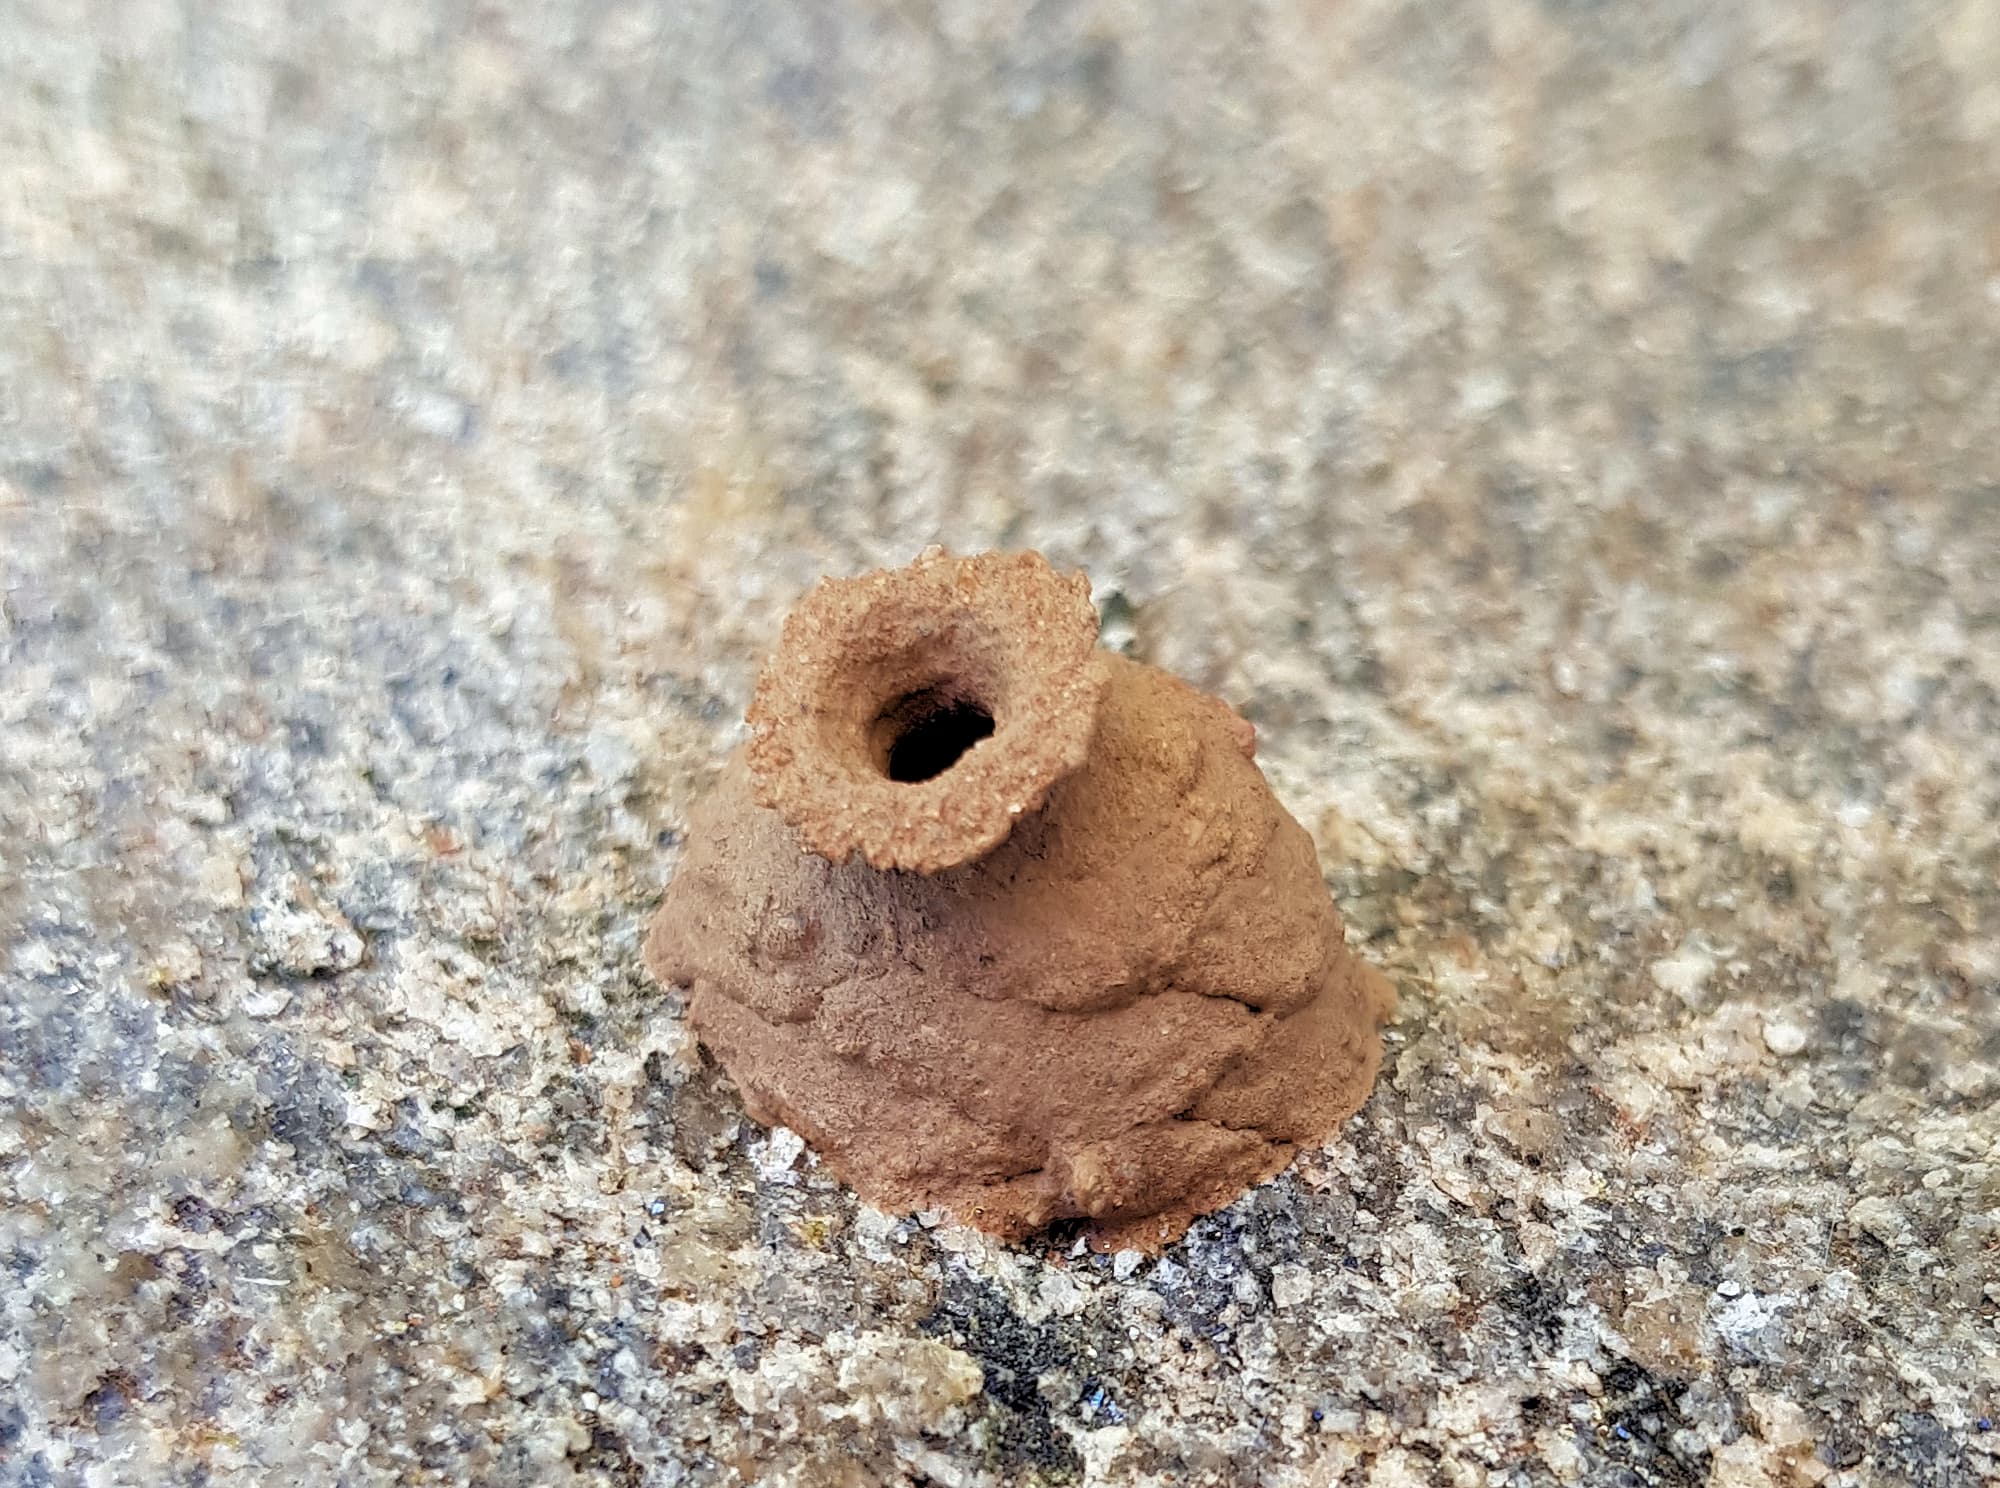 Nest of the Potter Wasp (Eumenes spp)